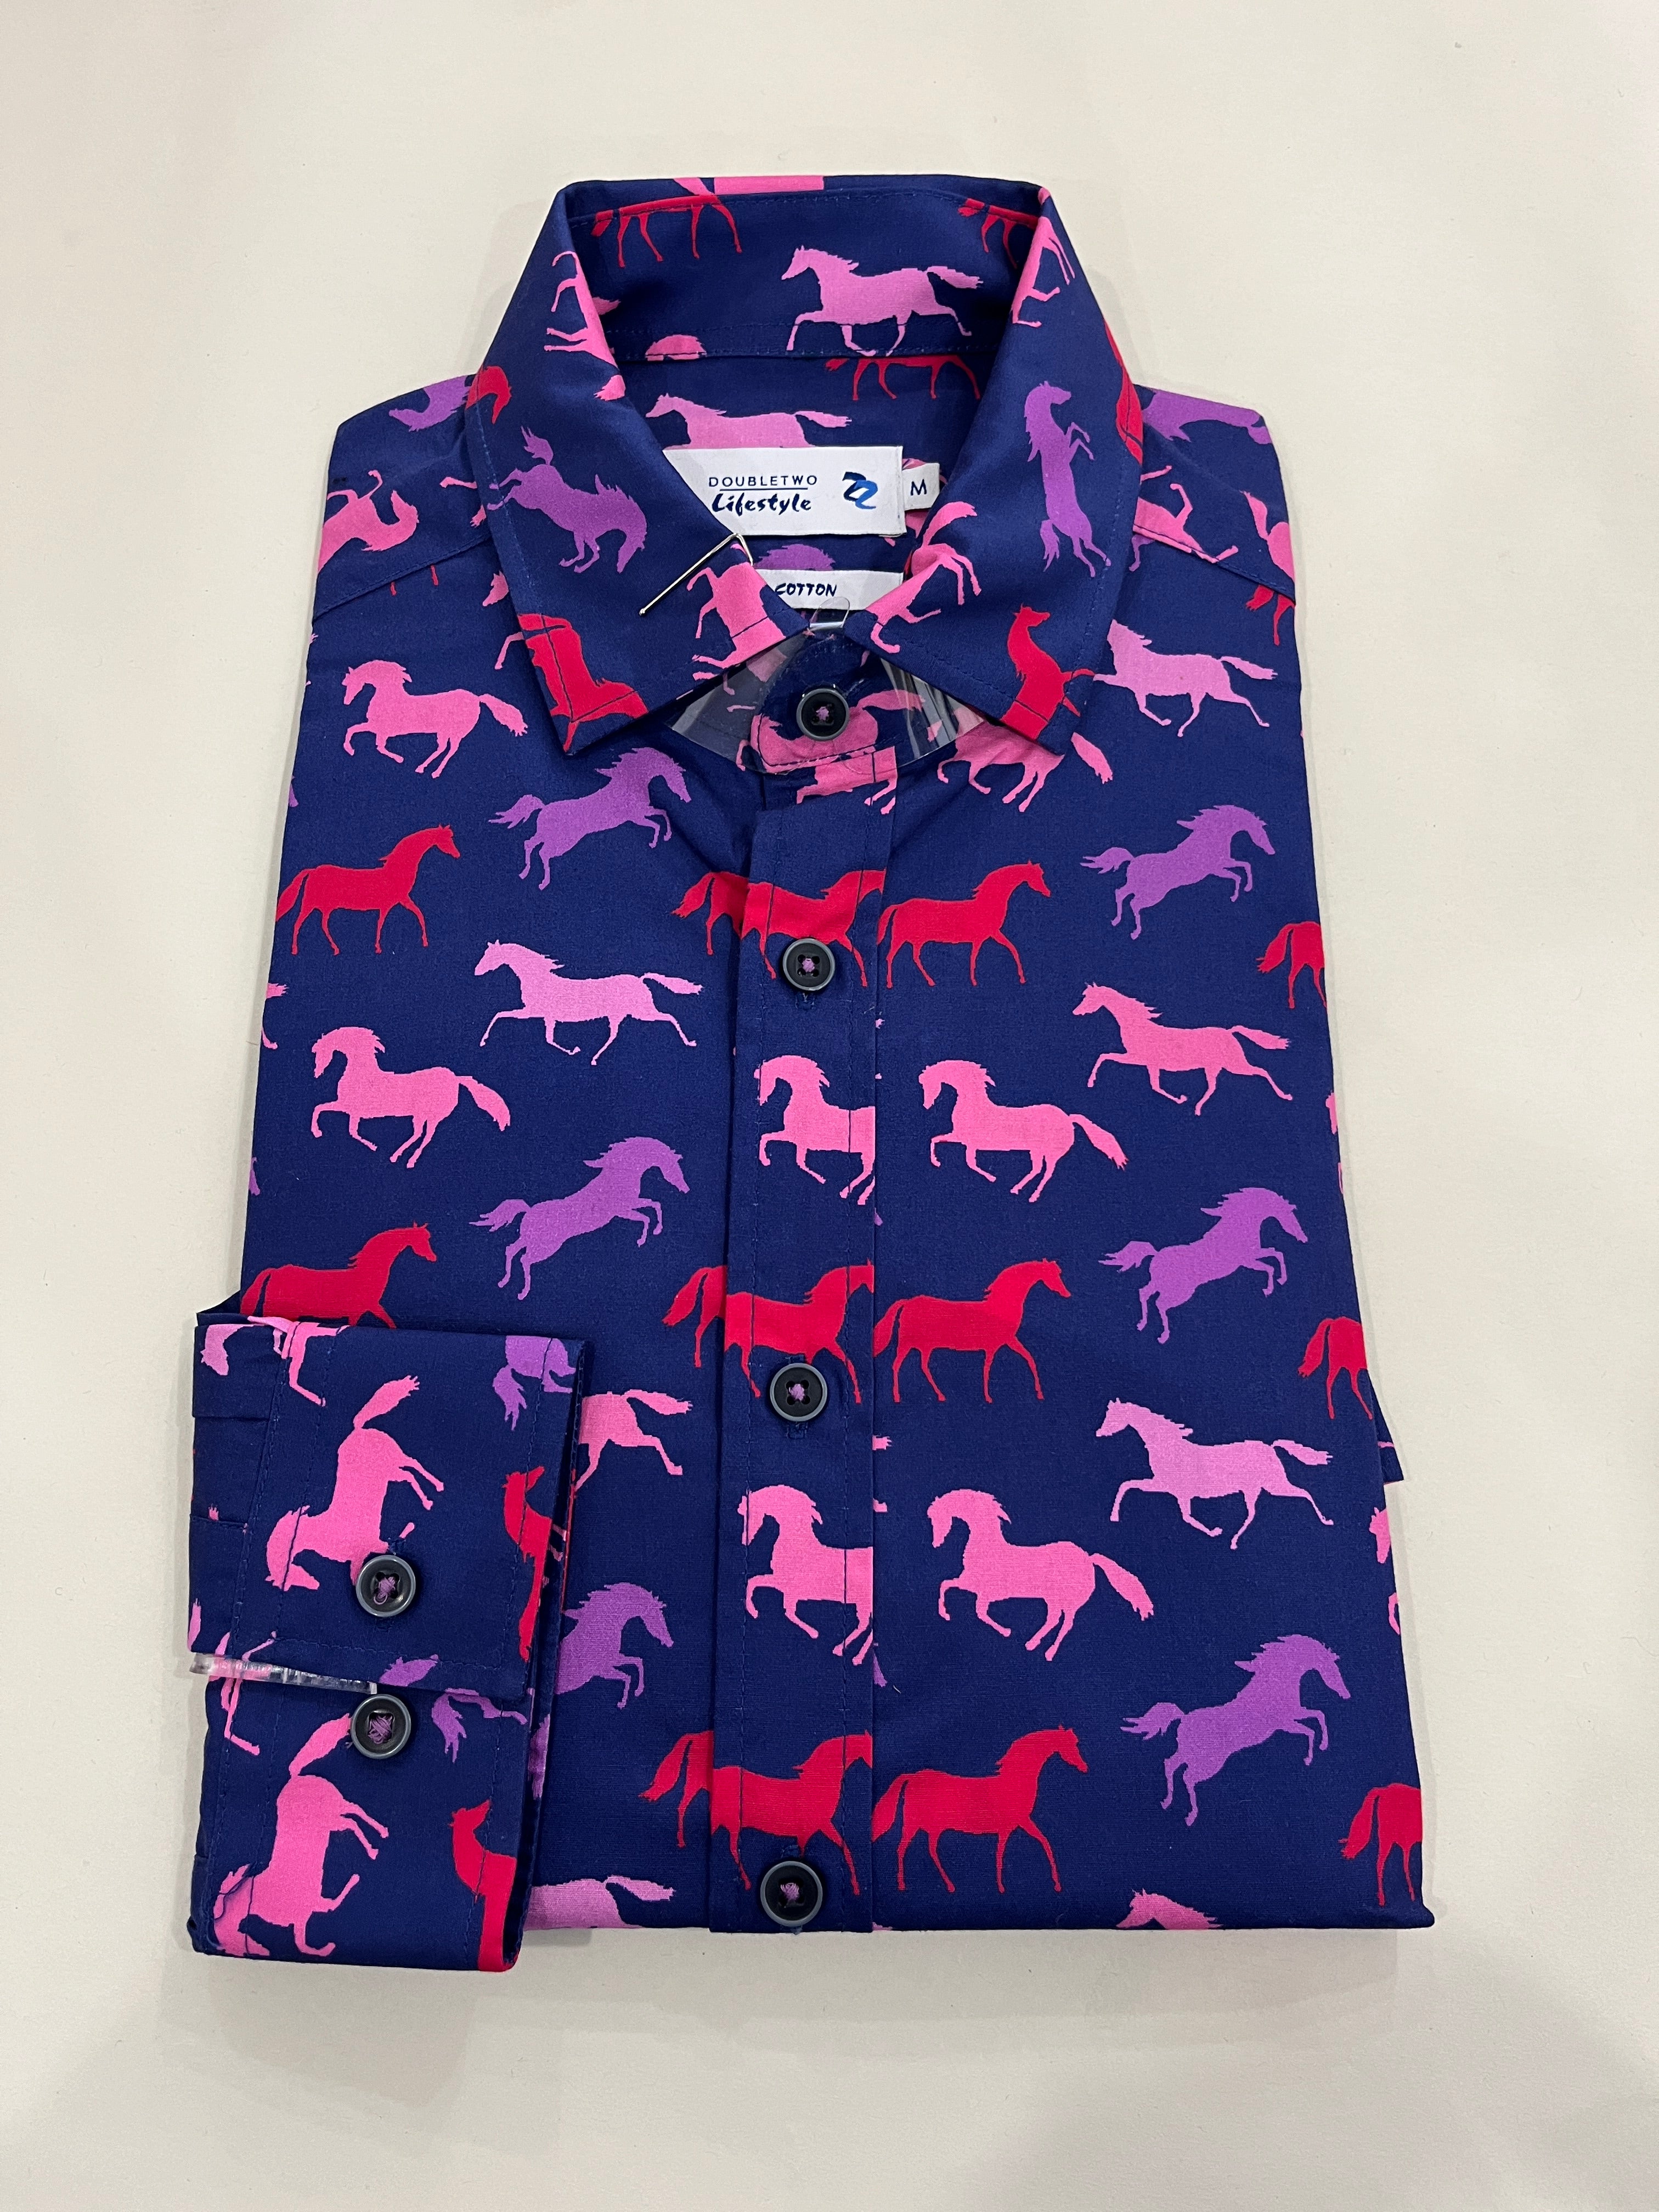 DOUBLE TWO MAGENTA, PURPLE AND PINK HORSE PRINT BLUE SHIRT